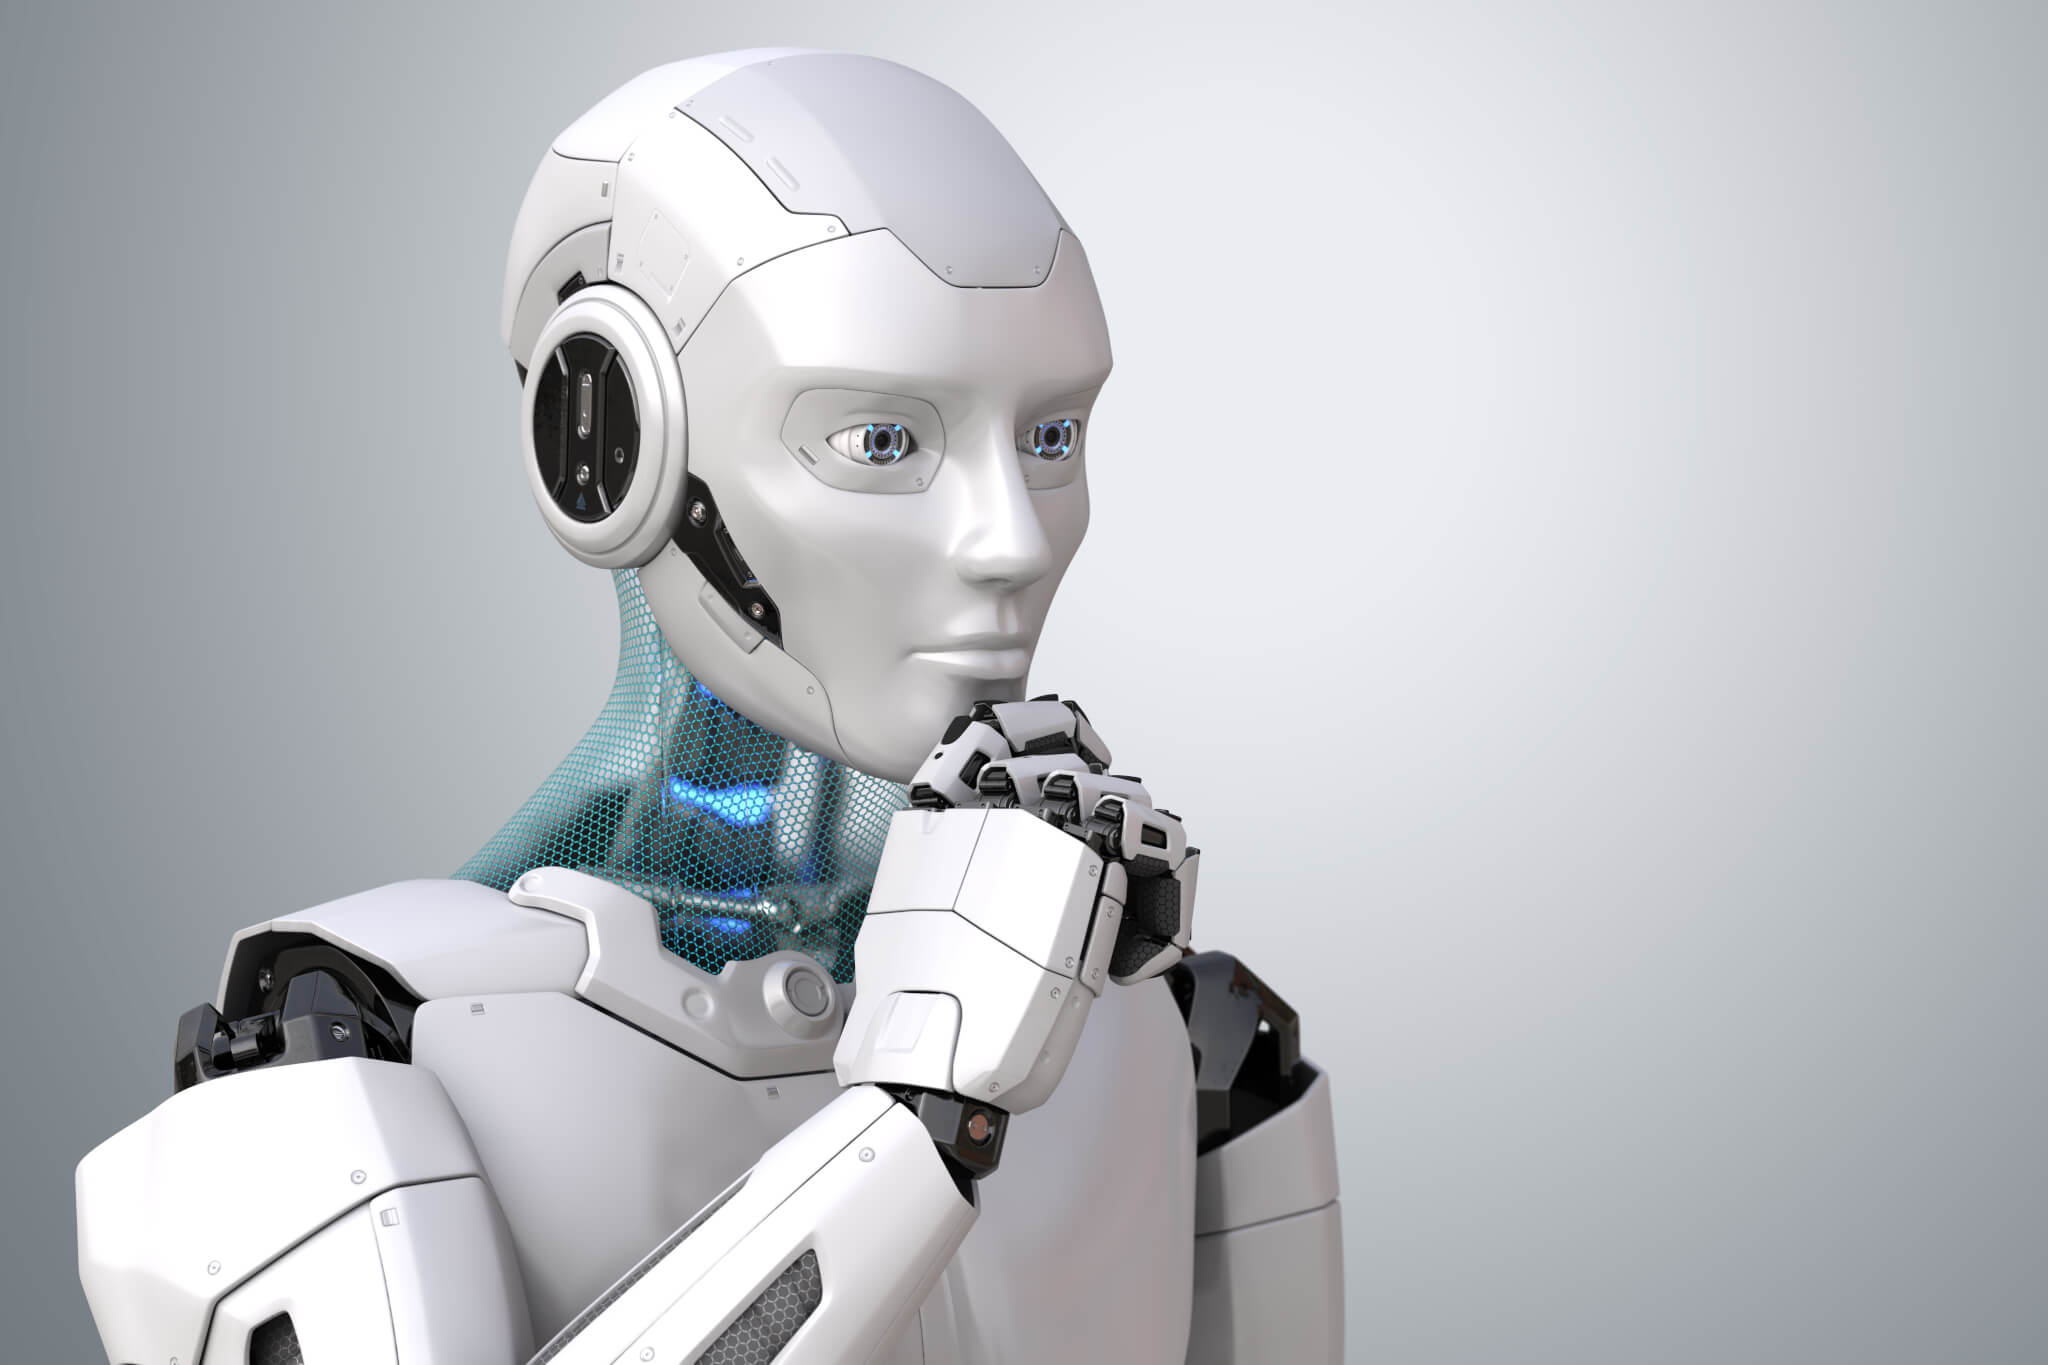 Robo image? Scientists train robot imagine itself, become self-aware Study Finds